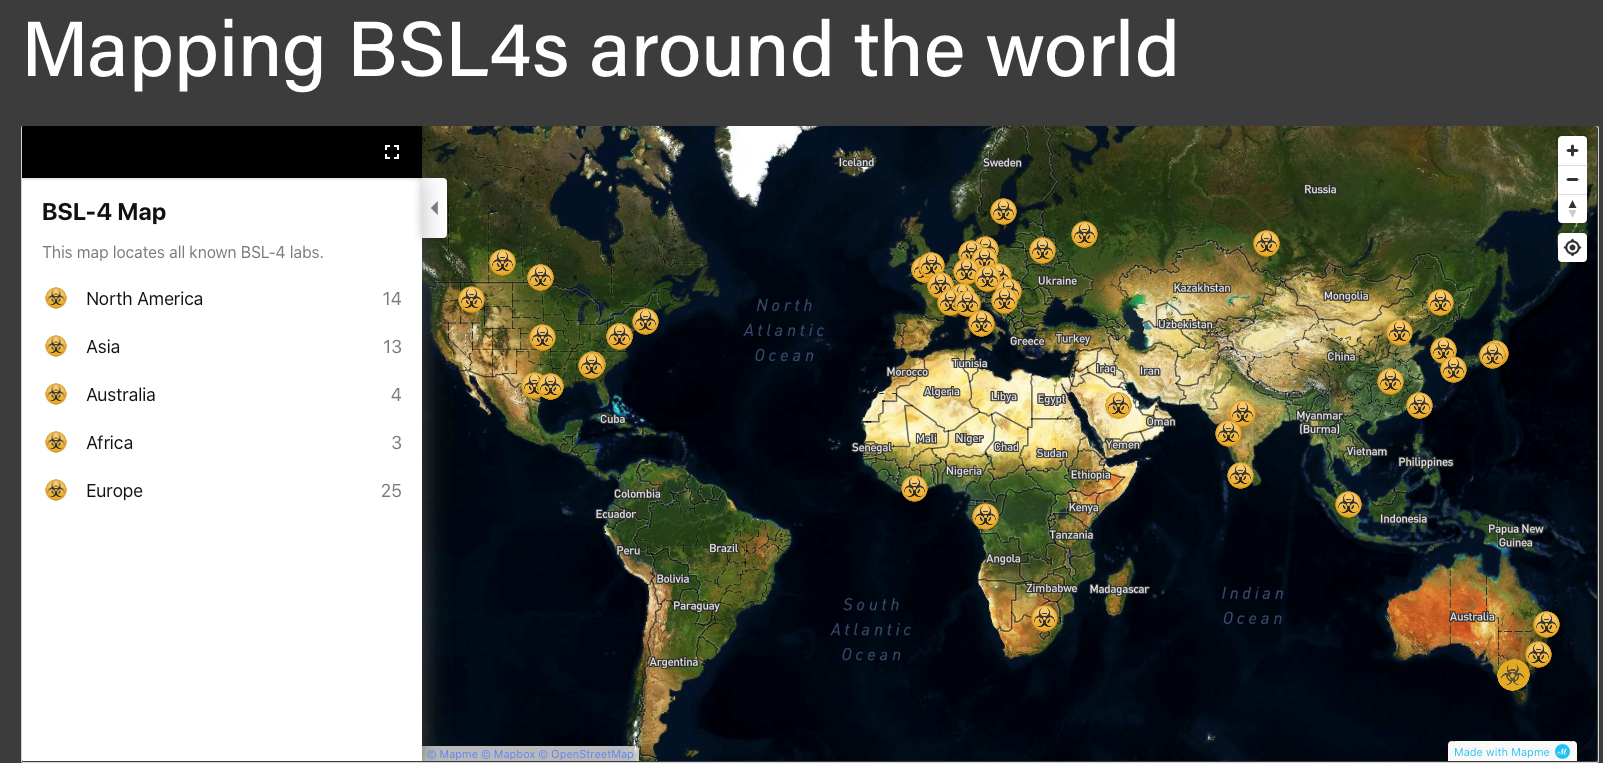 A map shows the locations of all the BSL-4 labs in the world.